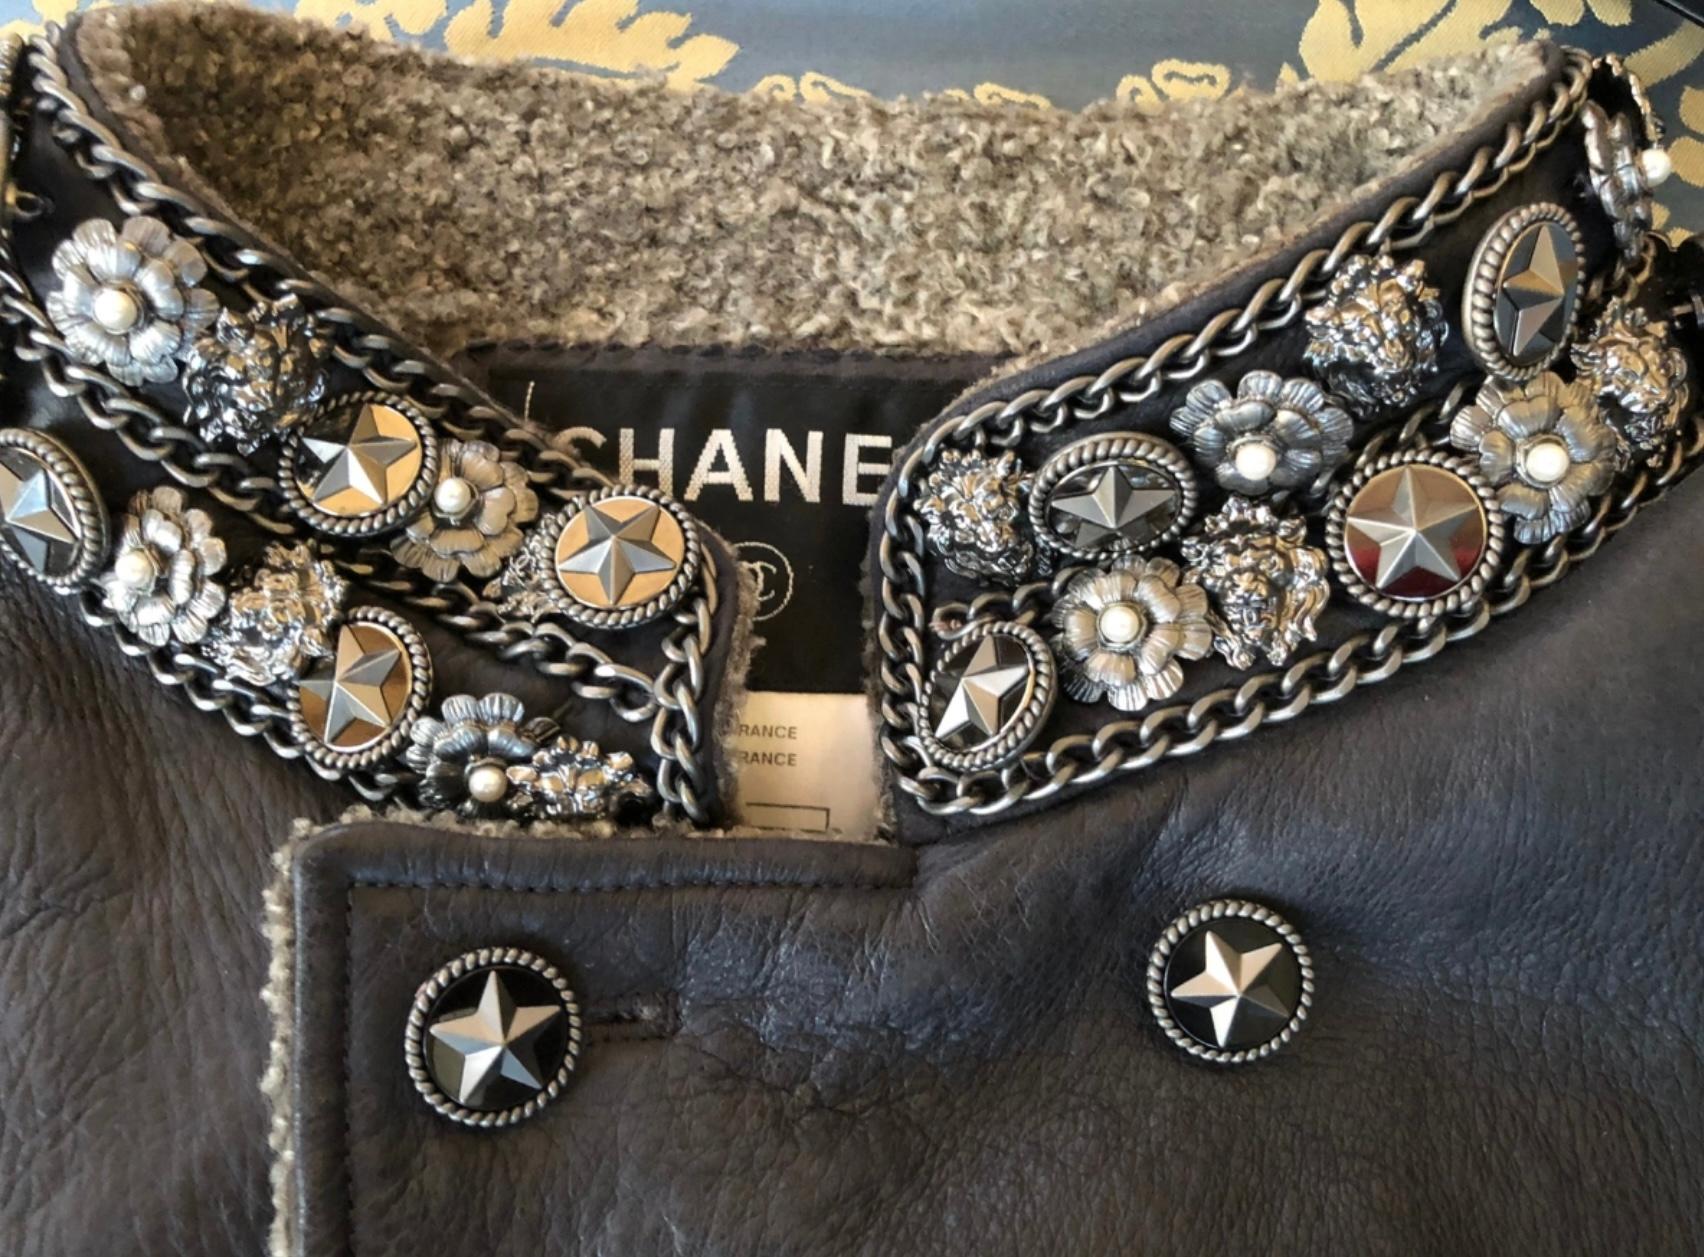 Boutique pirce over 14,000€
Collectors Chanel black shearling jacket with stunning jewel embellishment: Camellias, lionhead: symbols of the house Chanel.
- signature metallic chain trim throughout
Size mark 40 FR. Condition is pristine.